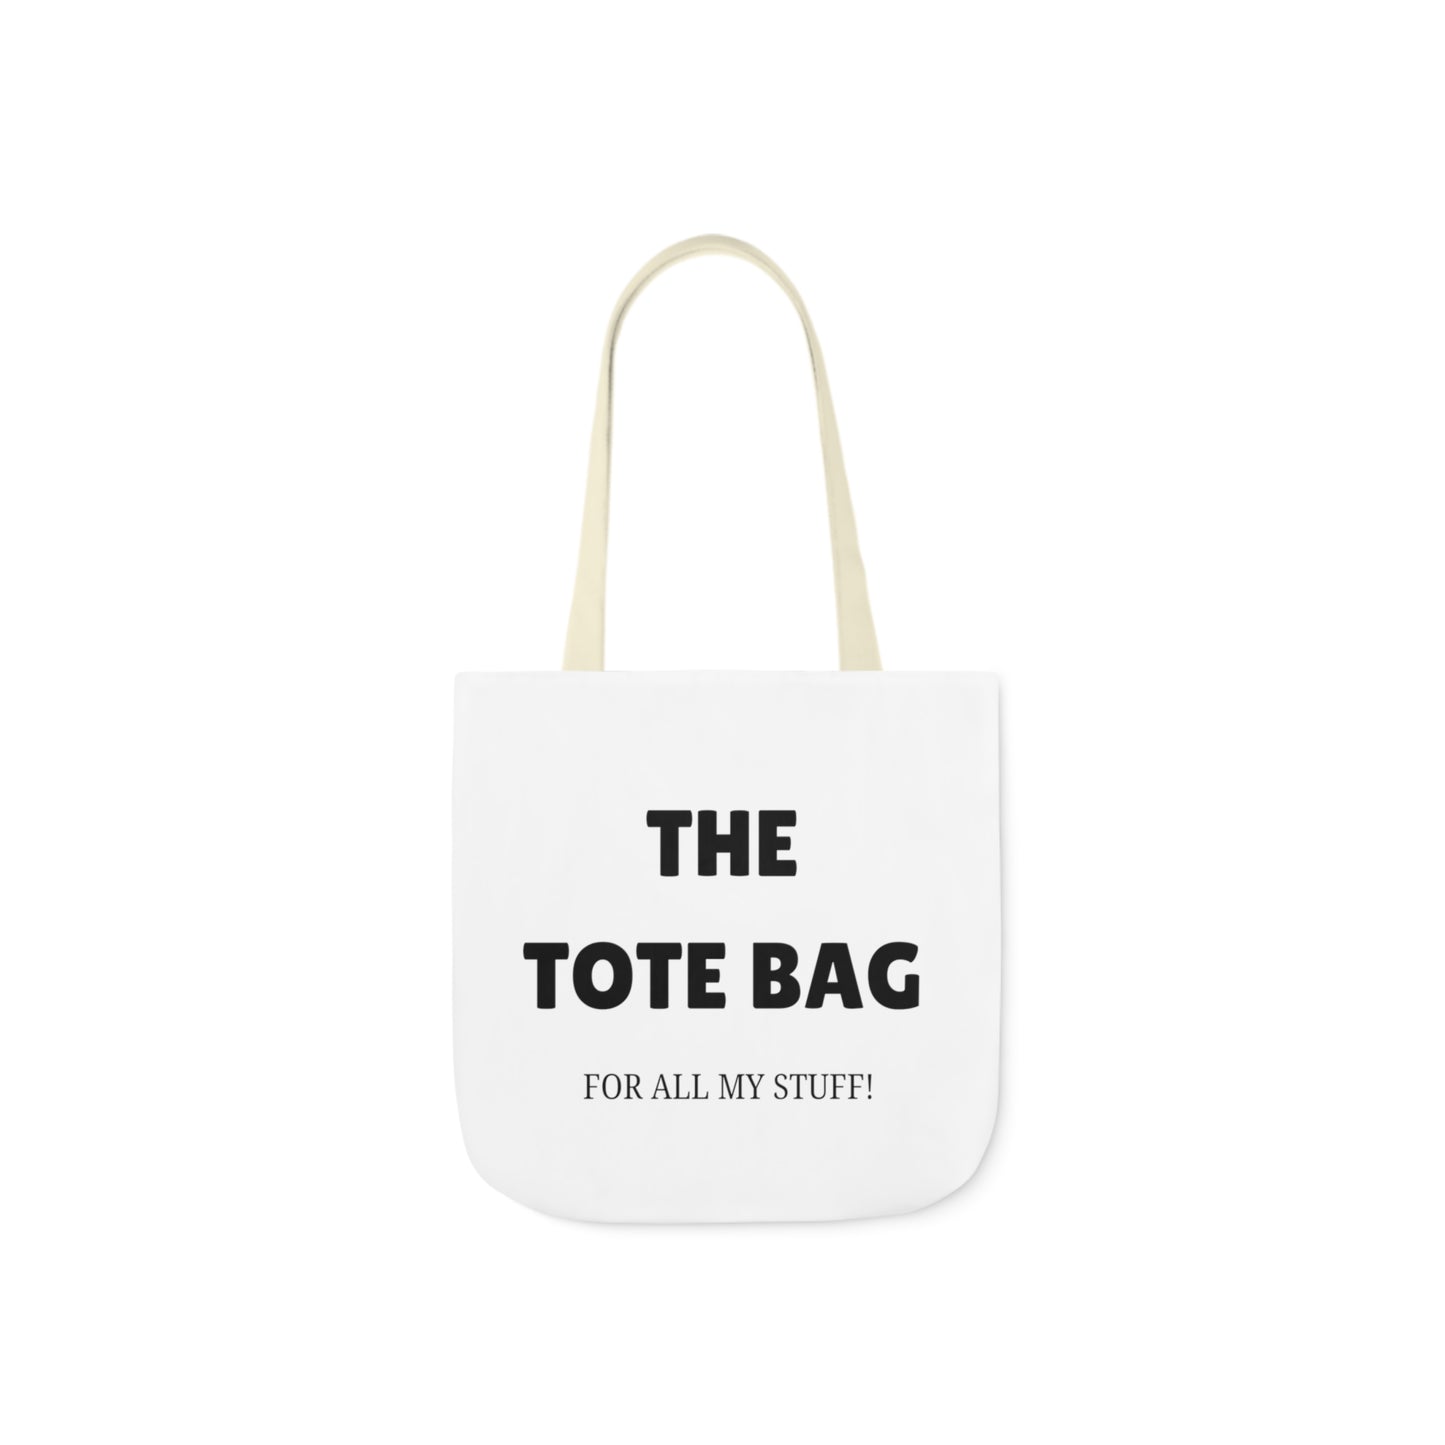 Thee Tote Bag